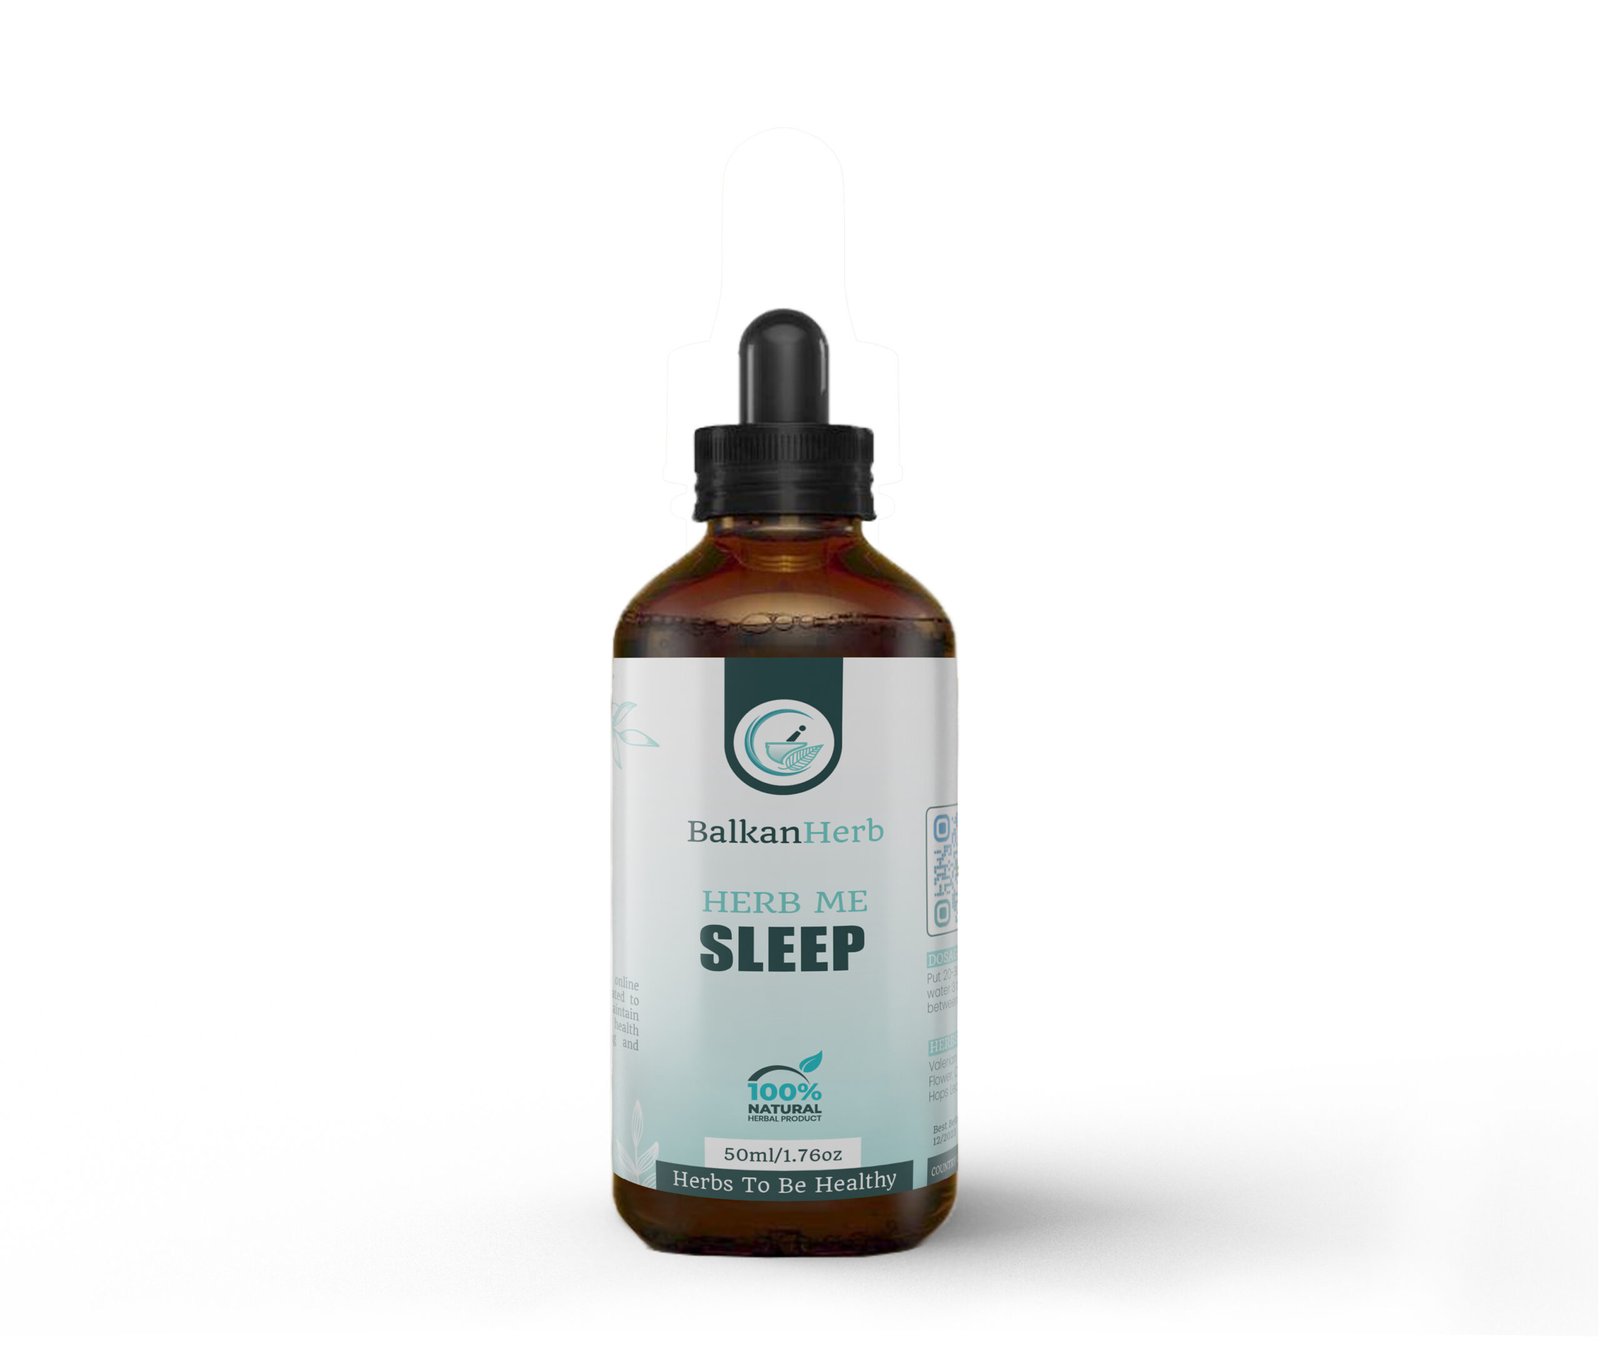 A showcase of a bottle of herbal extract formula for better sleep by BalkanHerb